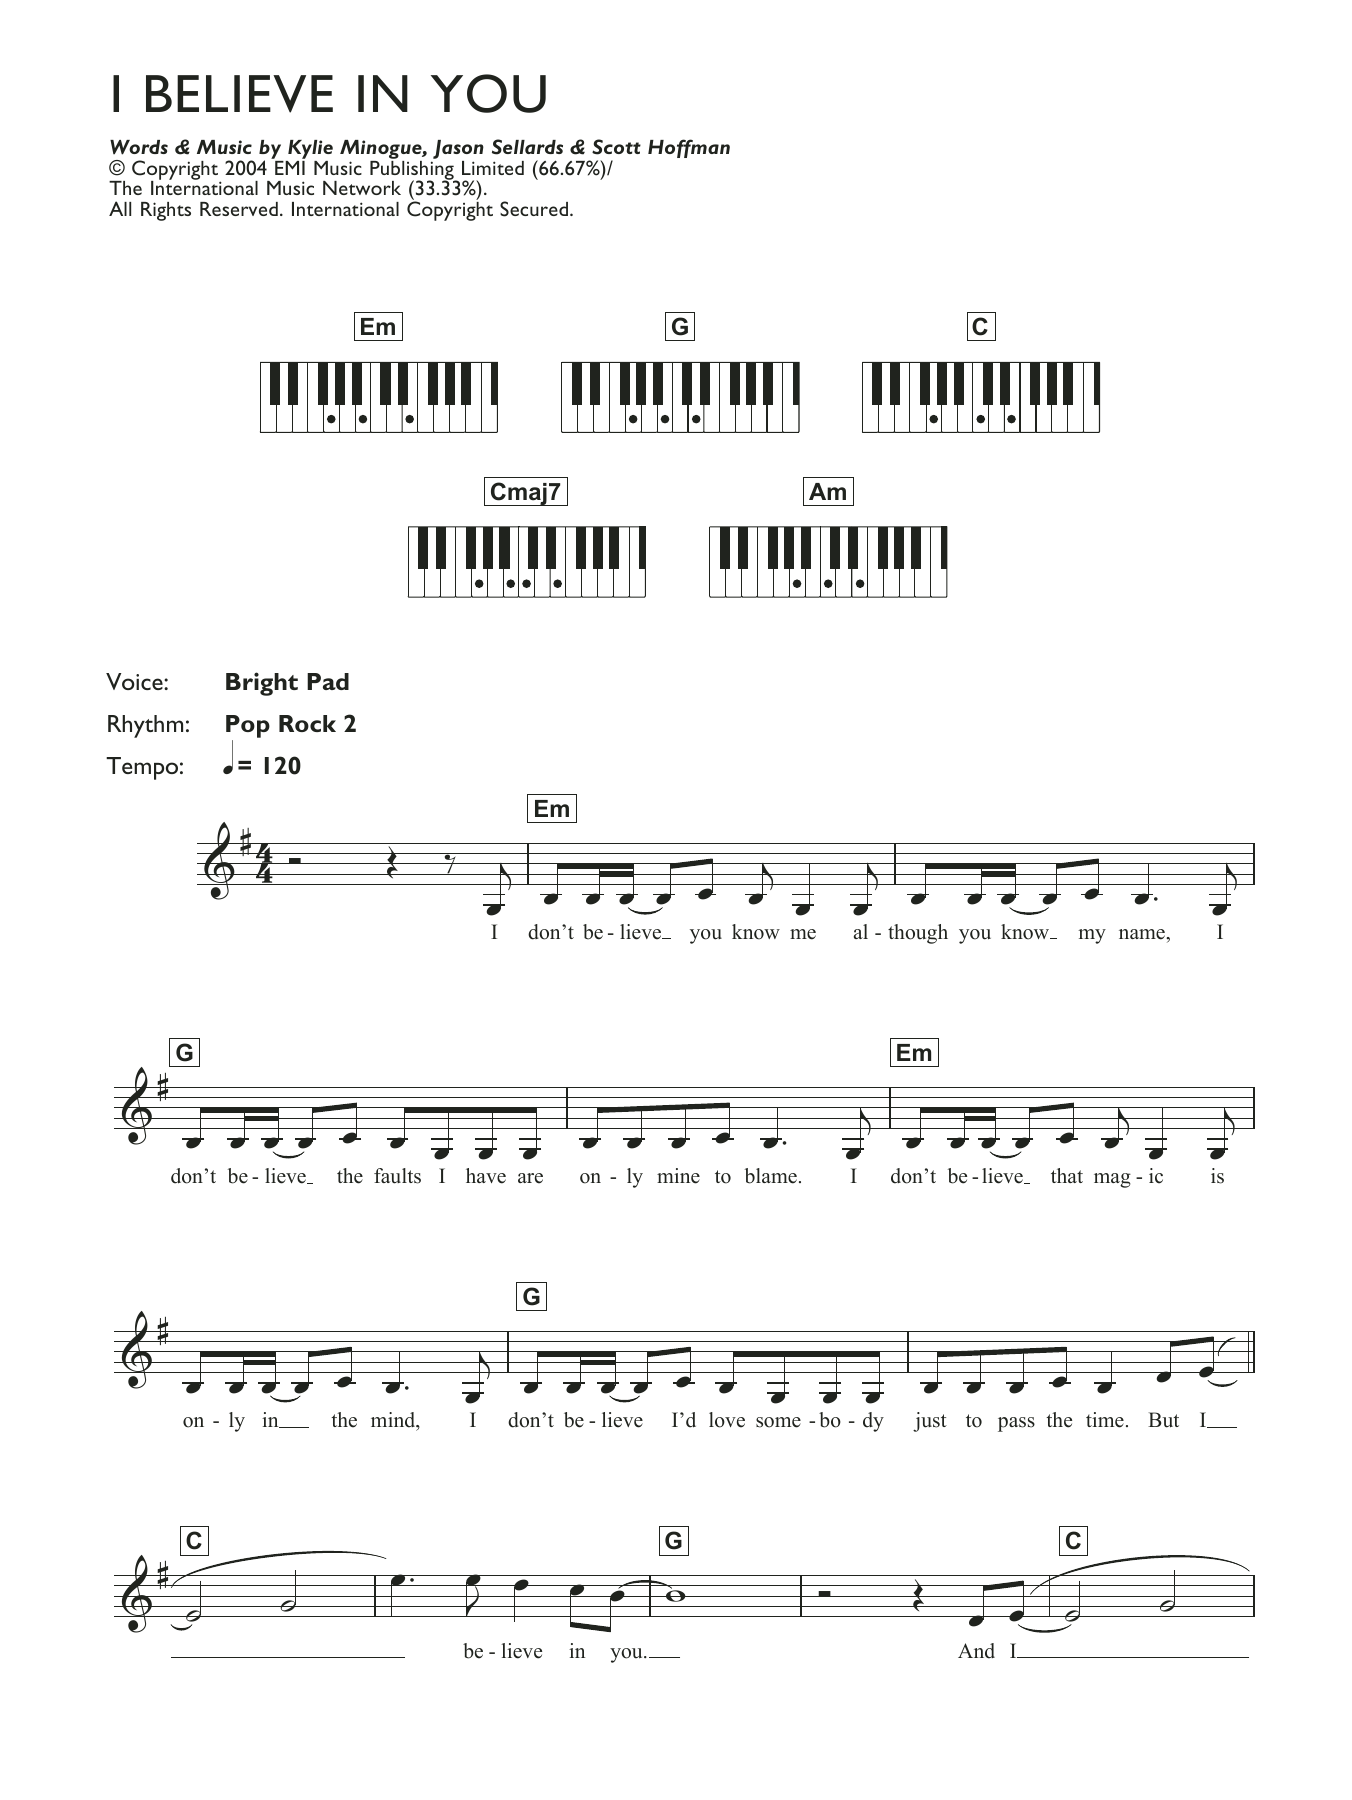 Download Kylie Minogue I Believe In You Sheet Music